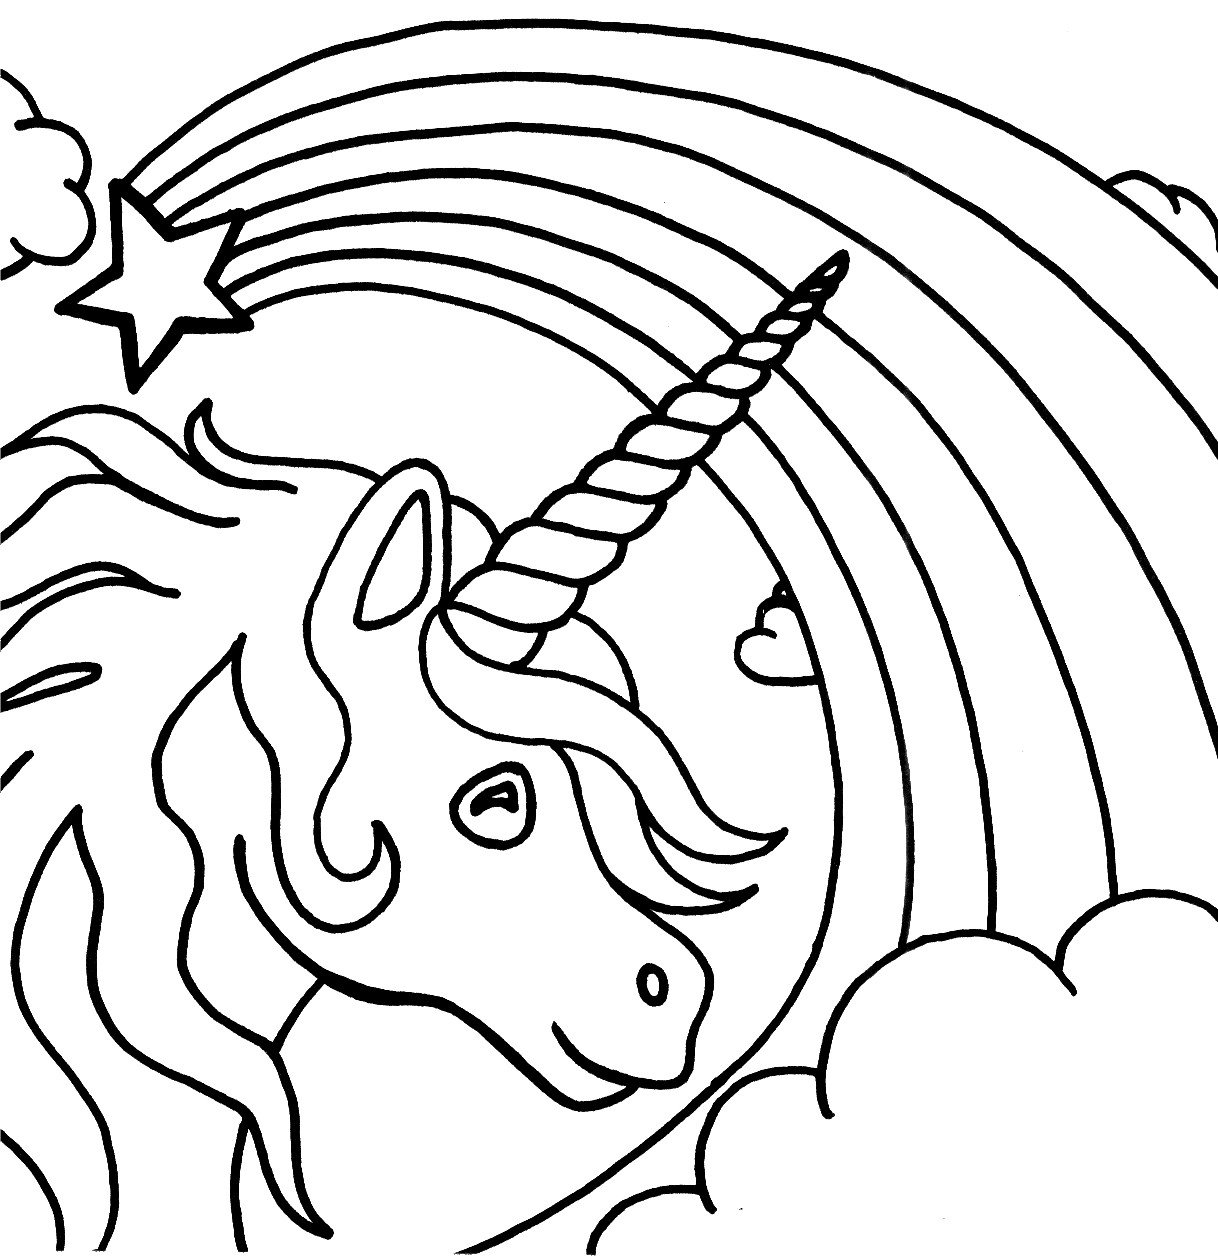 Art Coloring Pages For Kids
 Unicorn To Color And Print The Art Jinni